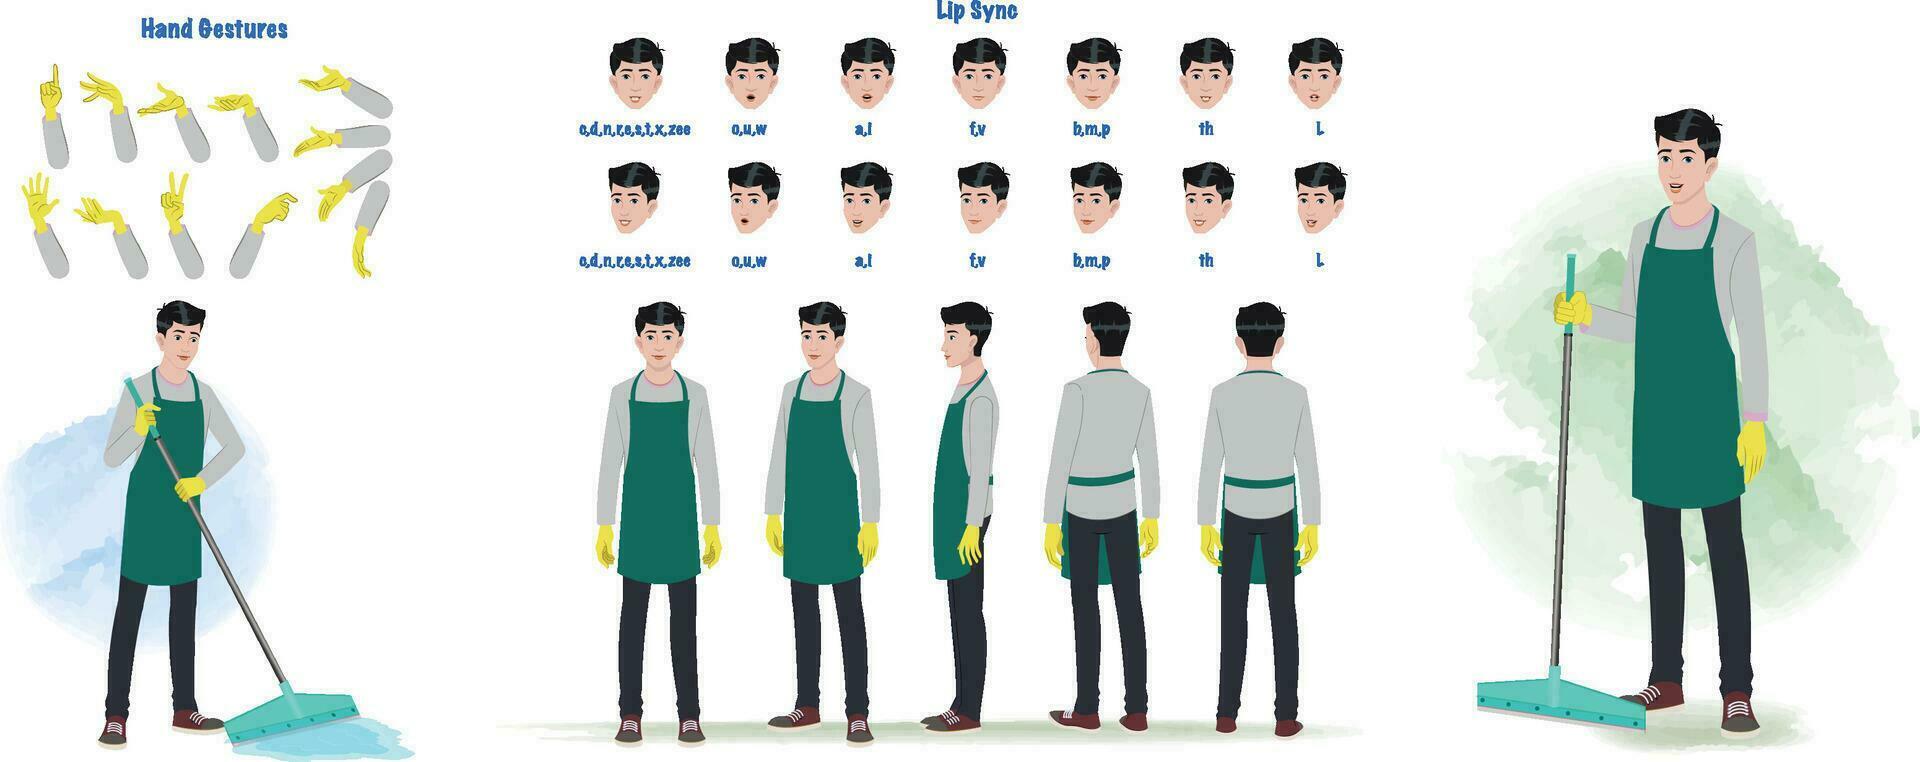 A cleaner, cleaning service model sheet, creation set. receptionist turnaround sheet, hand gestures, lip sync vector